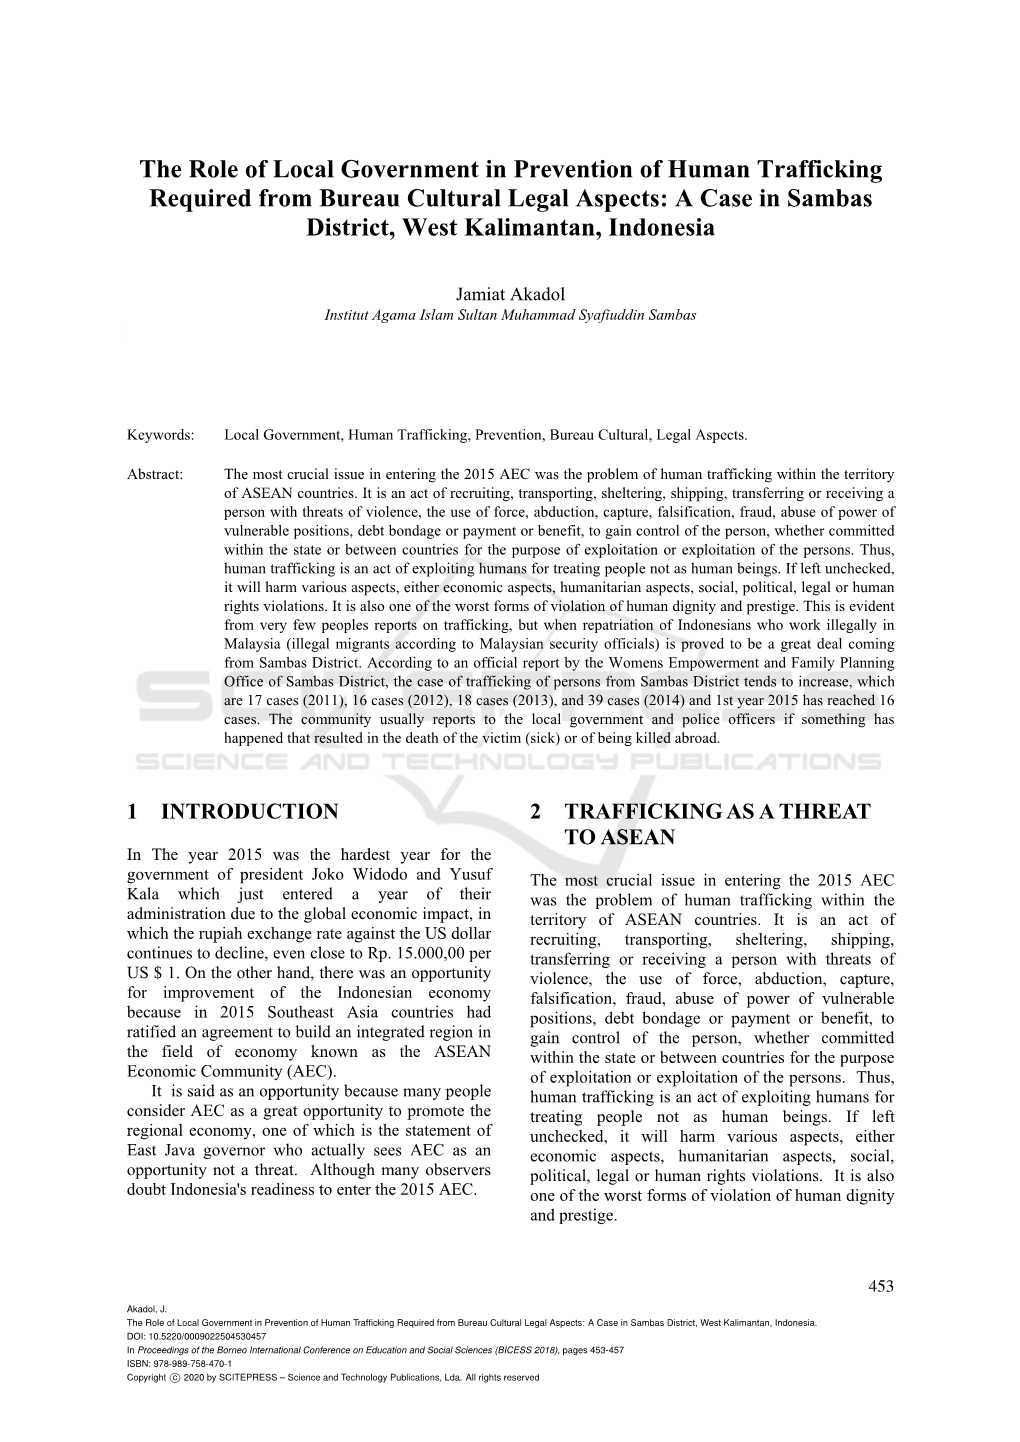 The Role of Local Government in Prevention of Human Trafficking Required from Bureau Cultural Legal Aspects: a Case in Sambas District, West Kalimantan, Indonesia